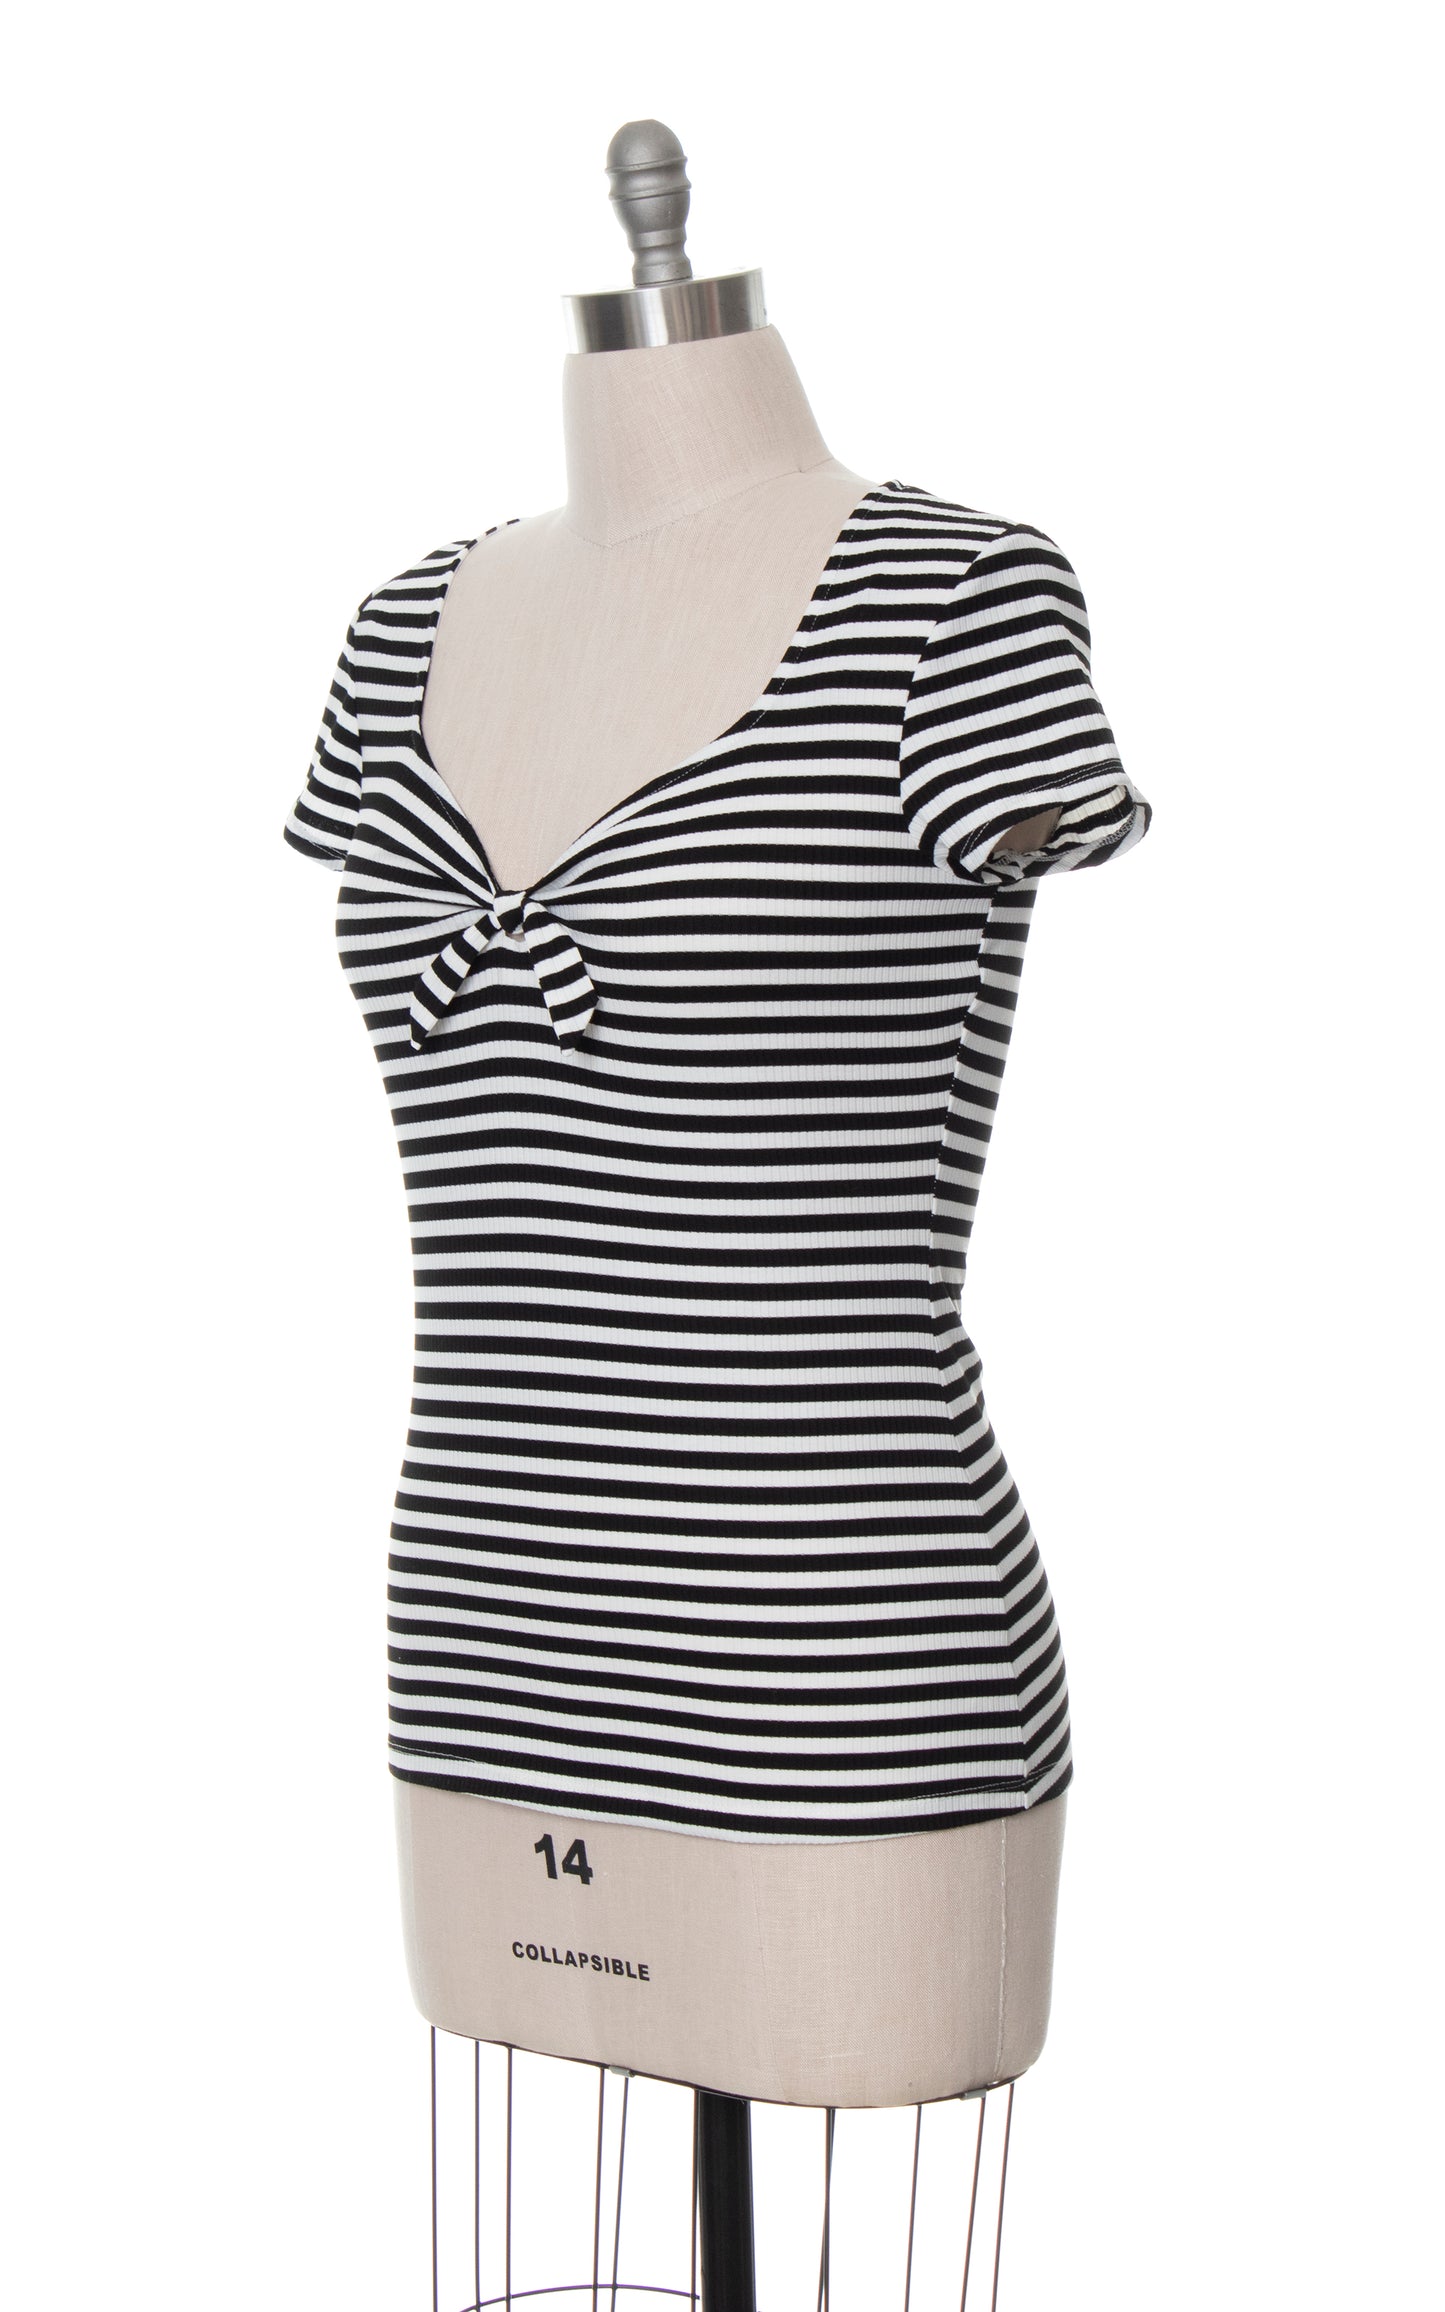 MODERN New with Tags UNIQUE VINTAGE Pin Up Striped T-Shirt Top Birthday Life Vintage